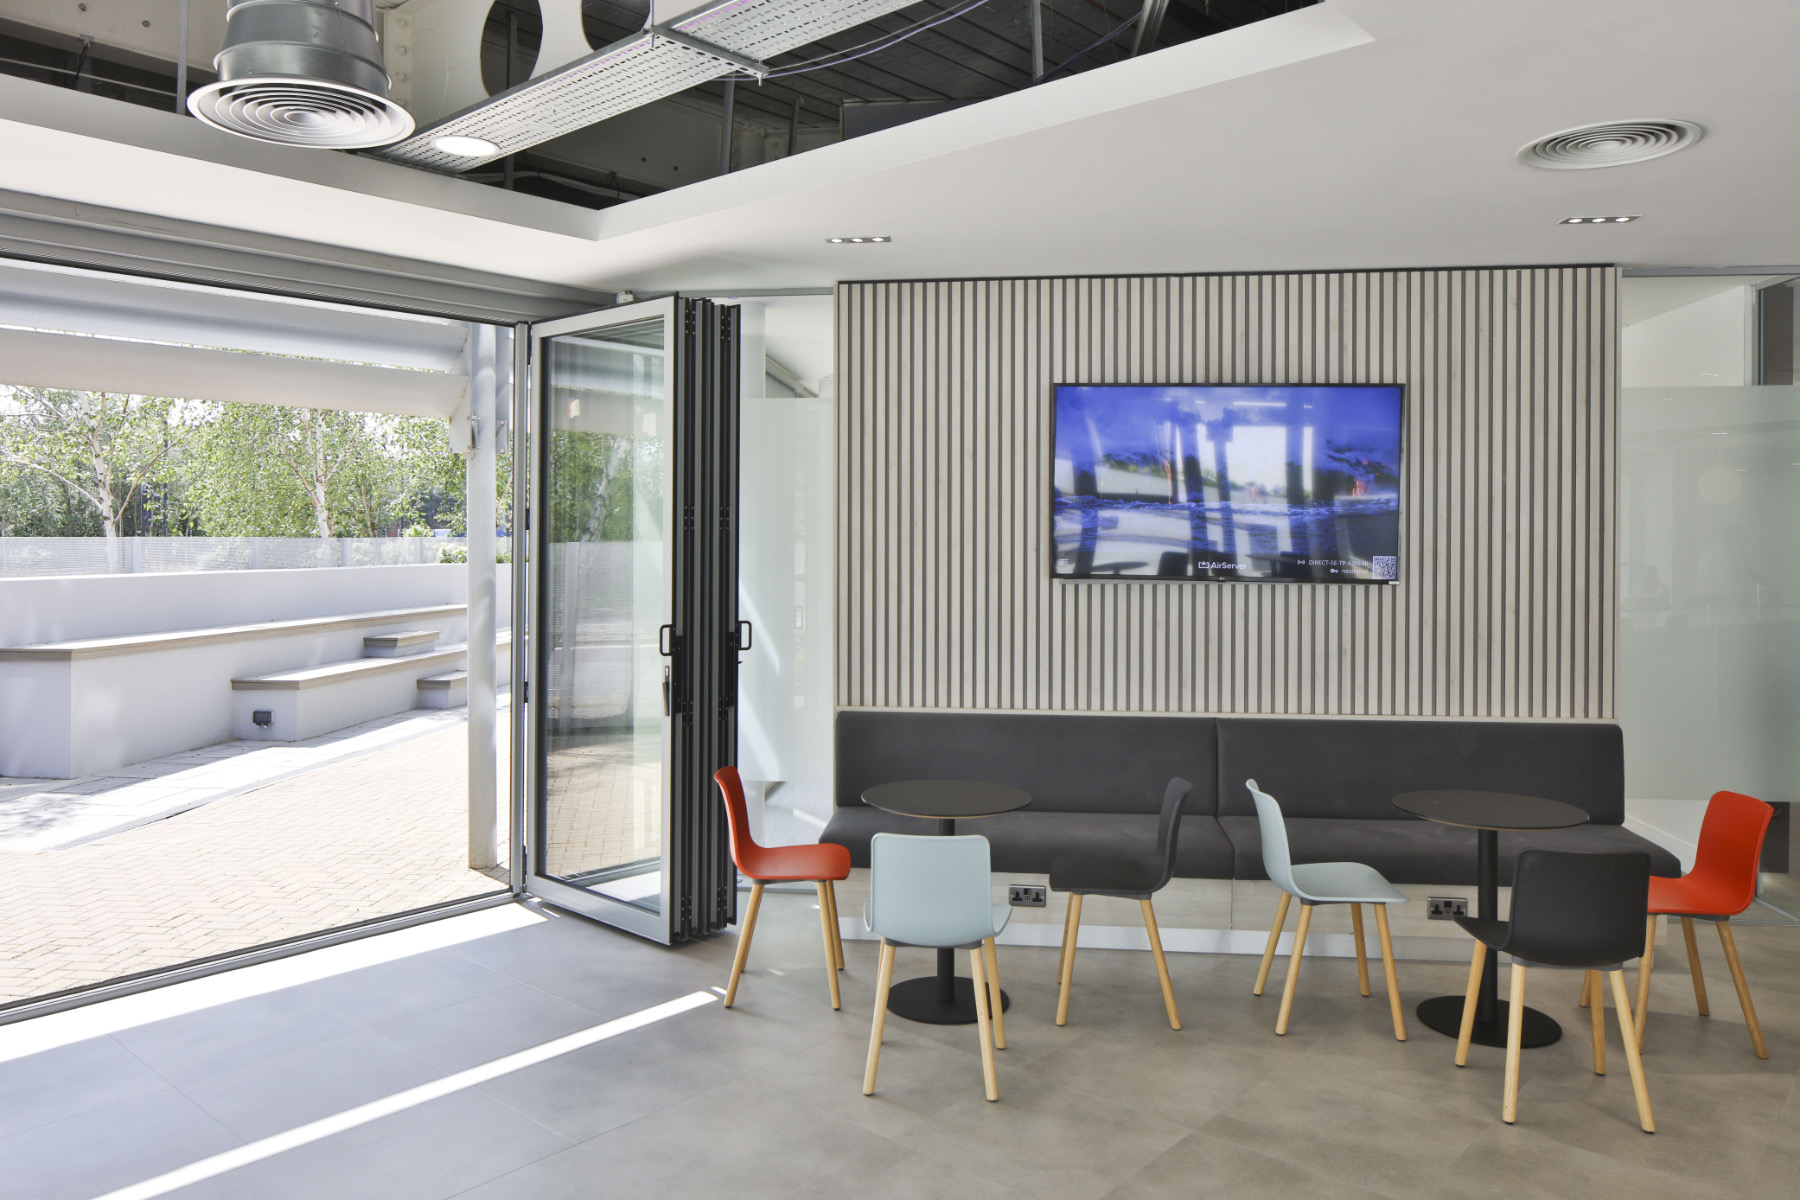 A Look Inside True Potential’s New Newcastle Office